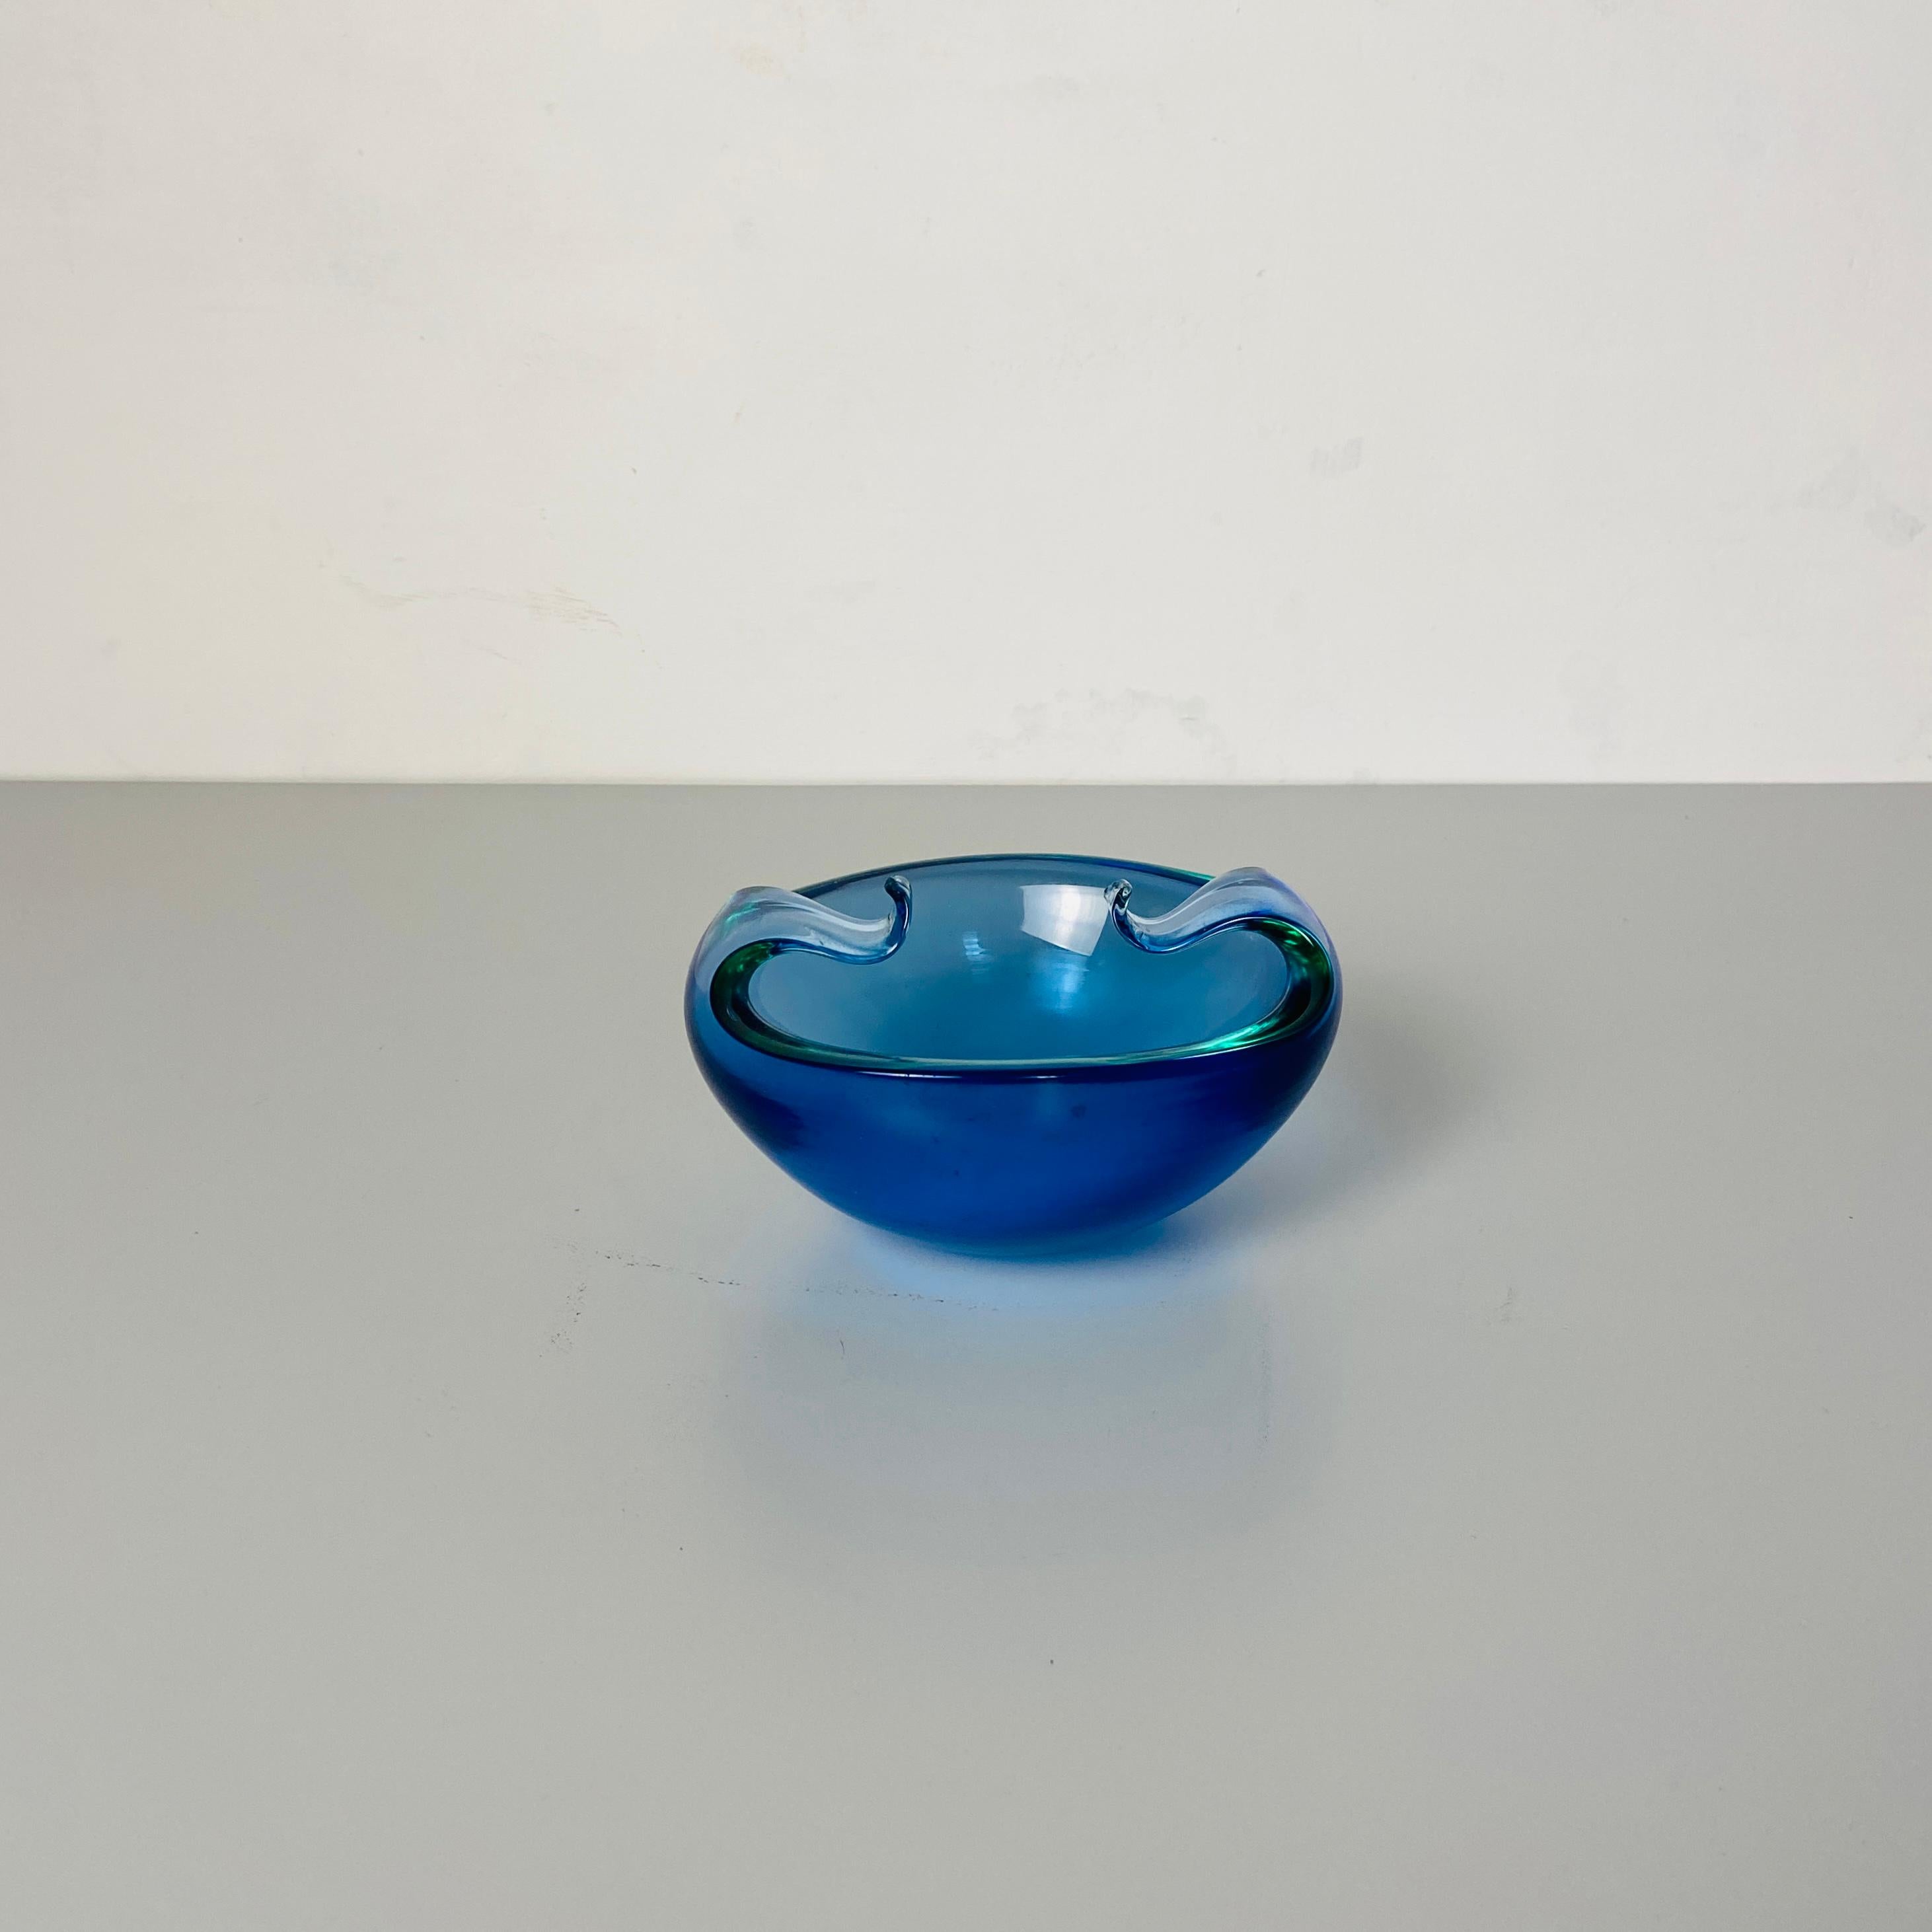 Italian mid-century modern Murano glass object holder with curled arms, 1970s
Blue Murano glass object holder in shades of blue and green, with two curled arms at the top.
This is a perfect detail can be rich and attractive your desk or your